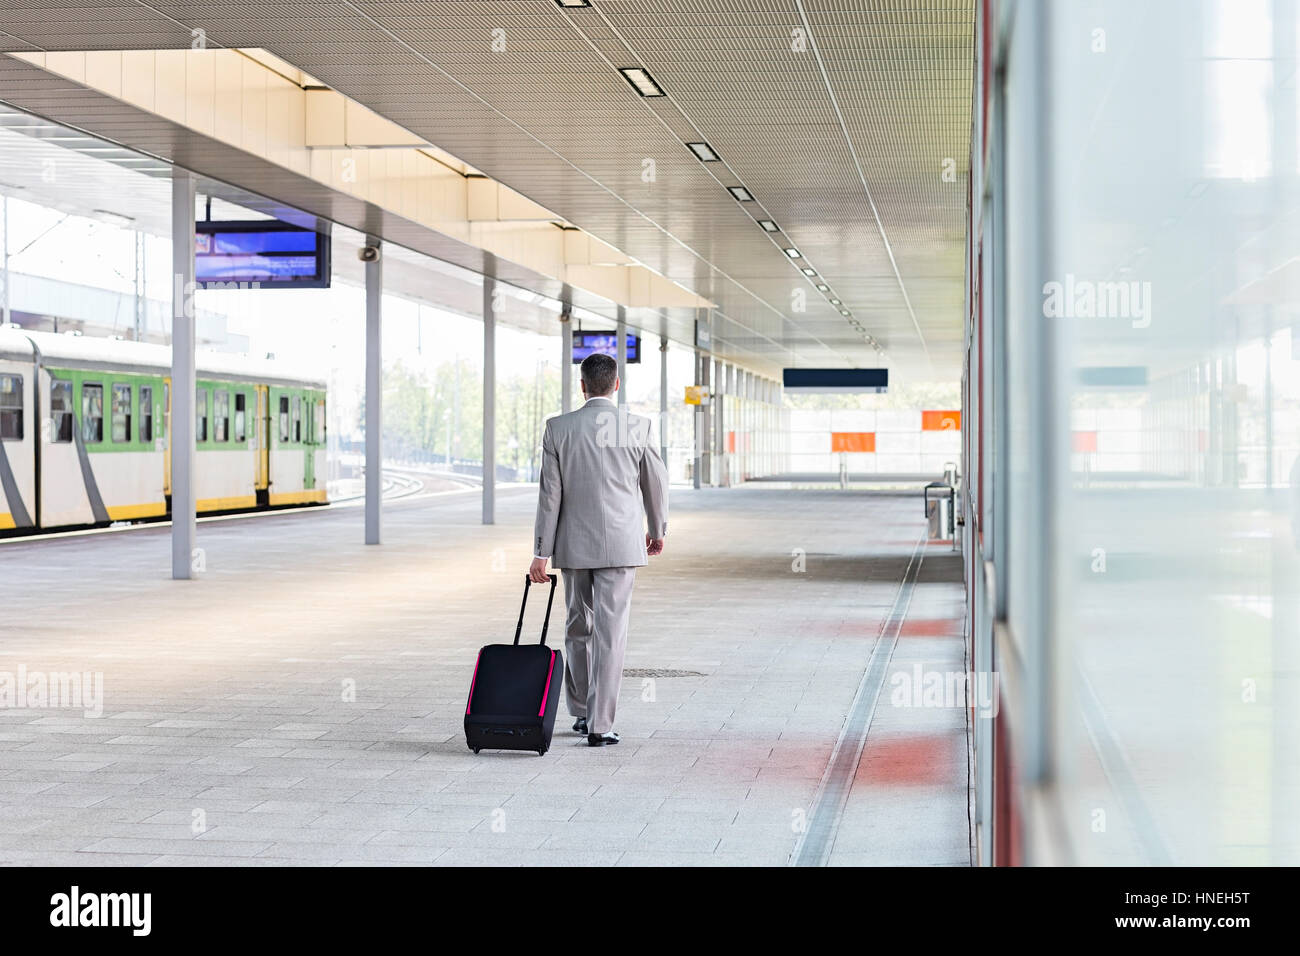 Full length rear view of businessman with luggage walking in railroad platform Stock Photo